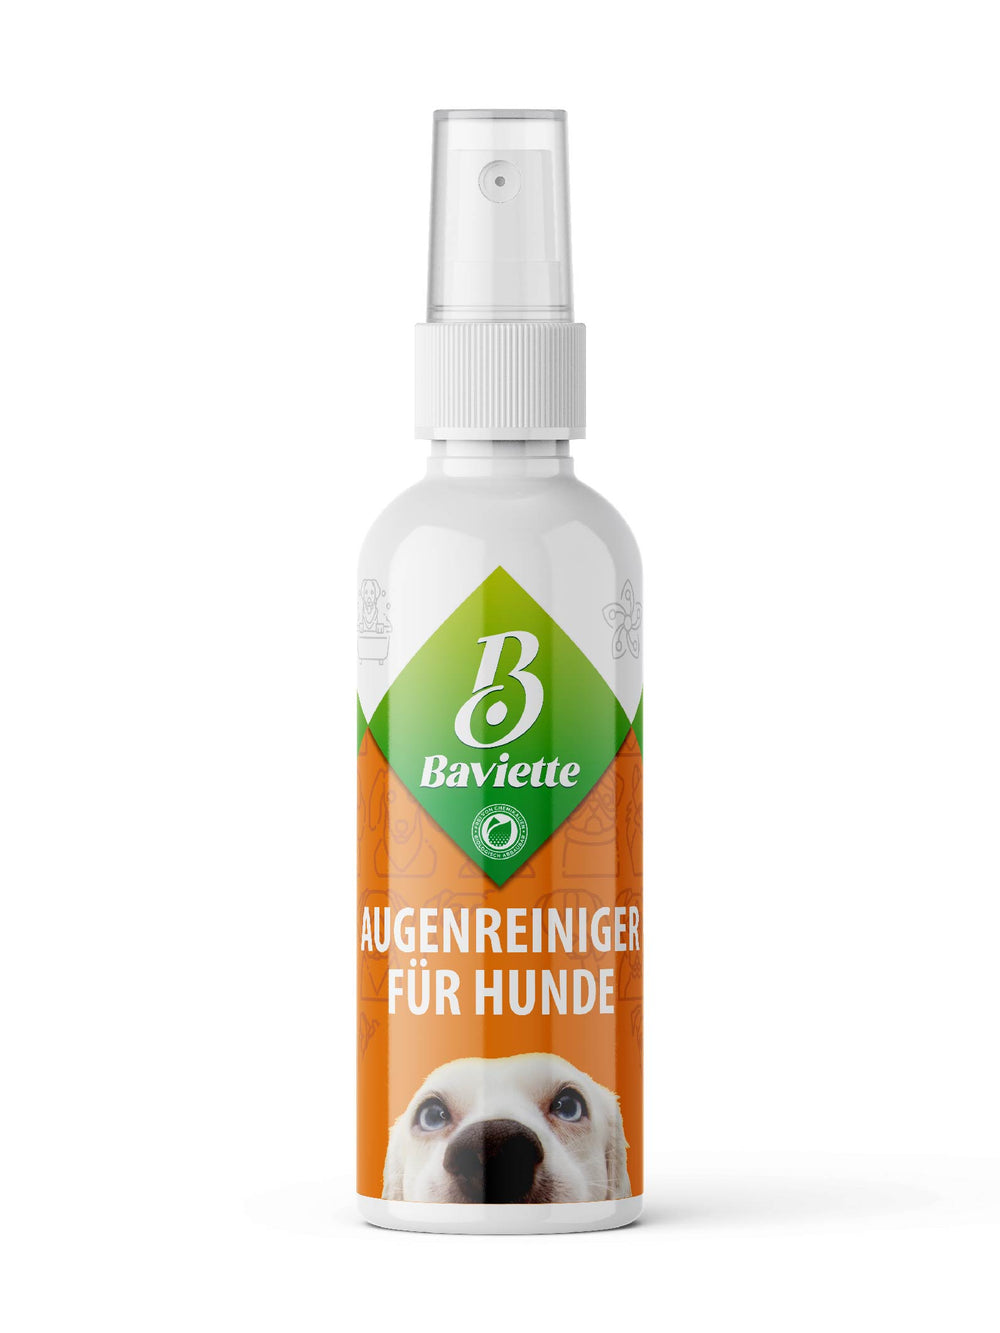 Eye cleaner for dogs